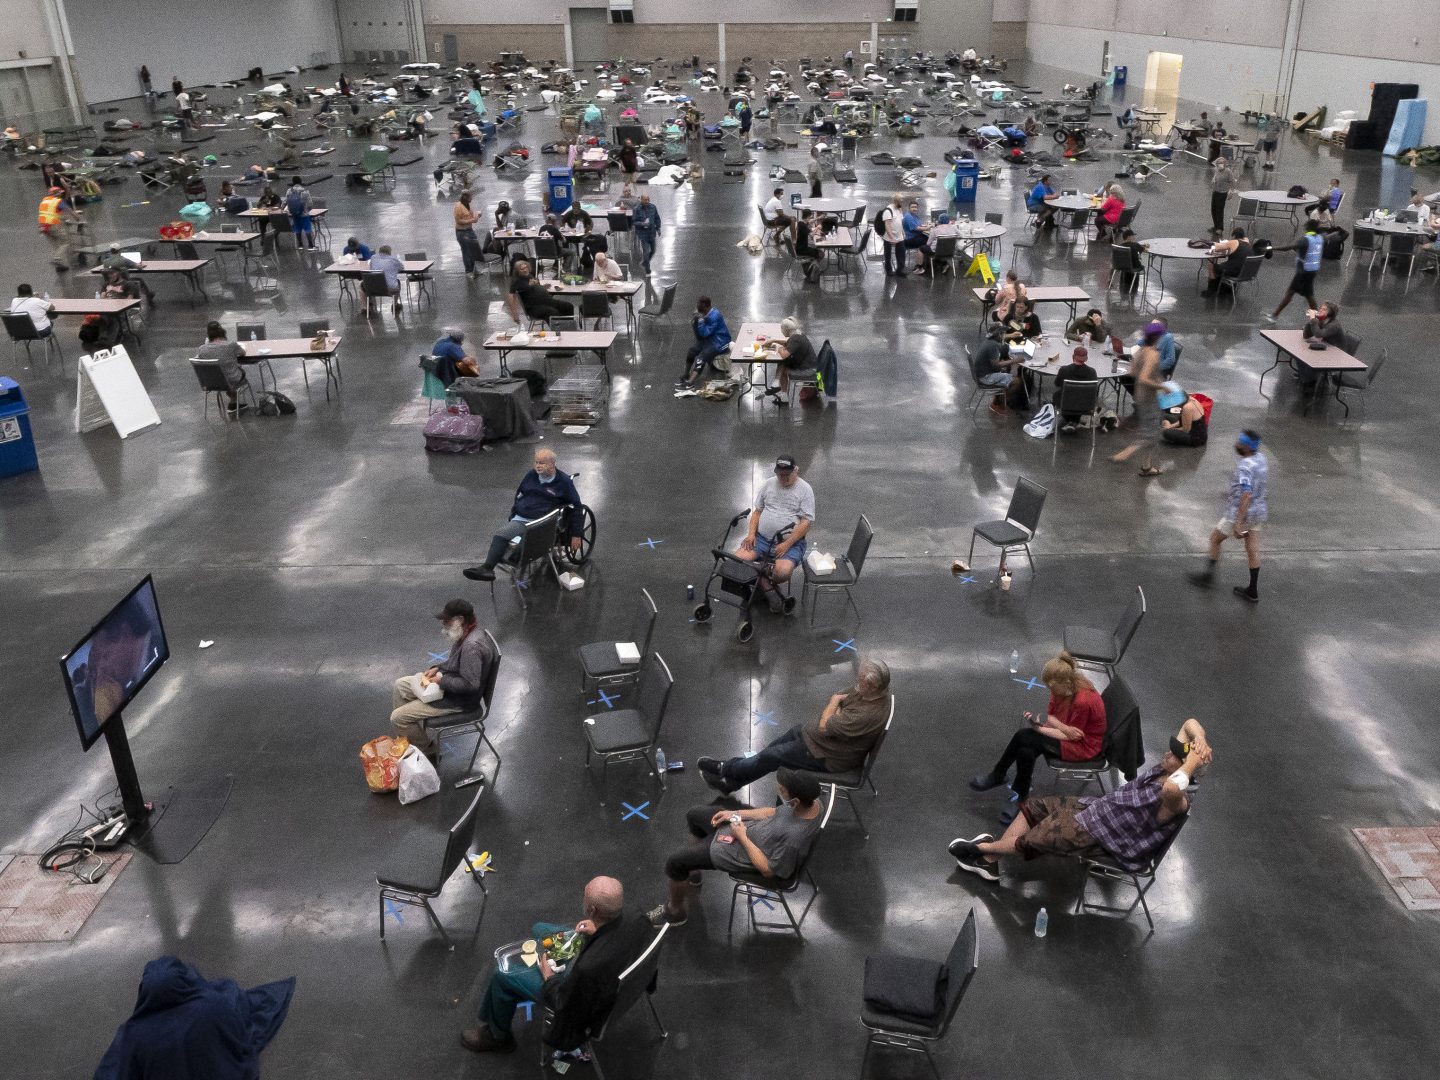 PORTLAND, OR - JUNE 27: Portland residents fill a cooling center with a capacity of about 300 people at the Oregon Convention Center June 27, 2021 in Portland, Oregon. Record breaking temperatures lingered over the Northwest during a historic heatwave this weekend. (Photo by Nathan Howard/Getty Images)